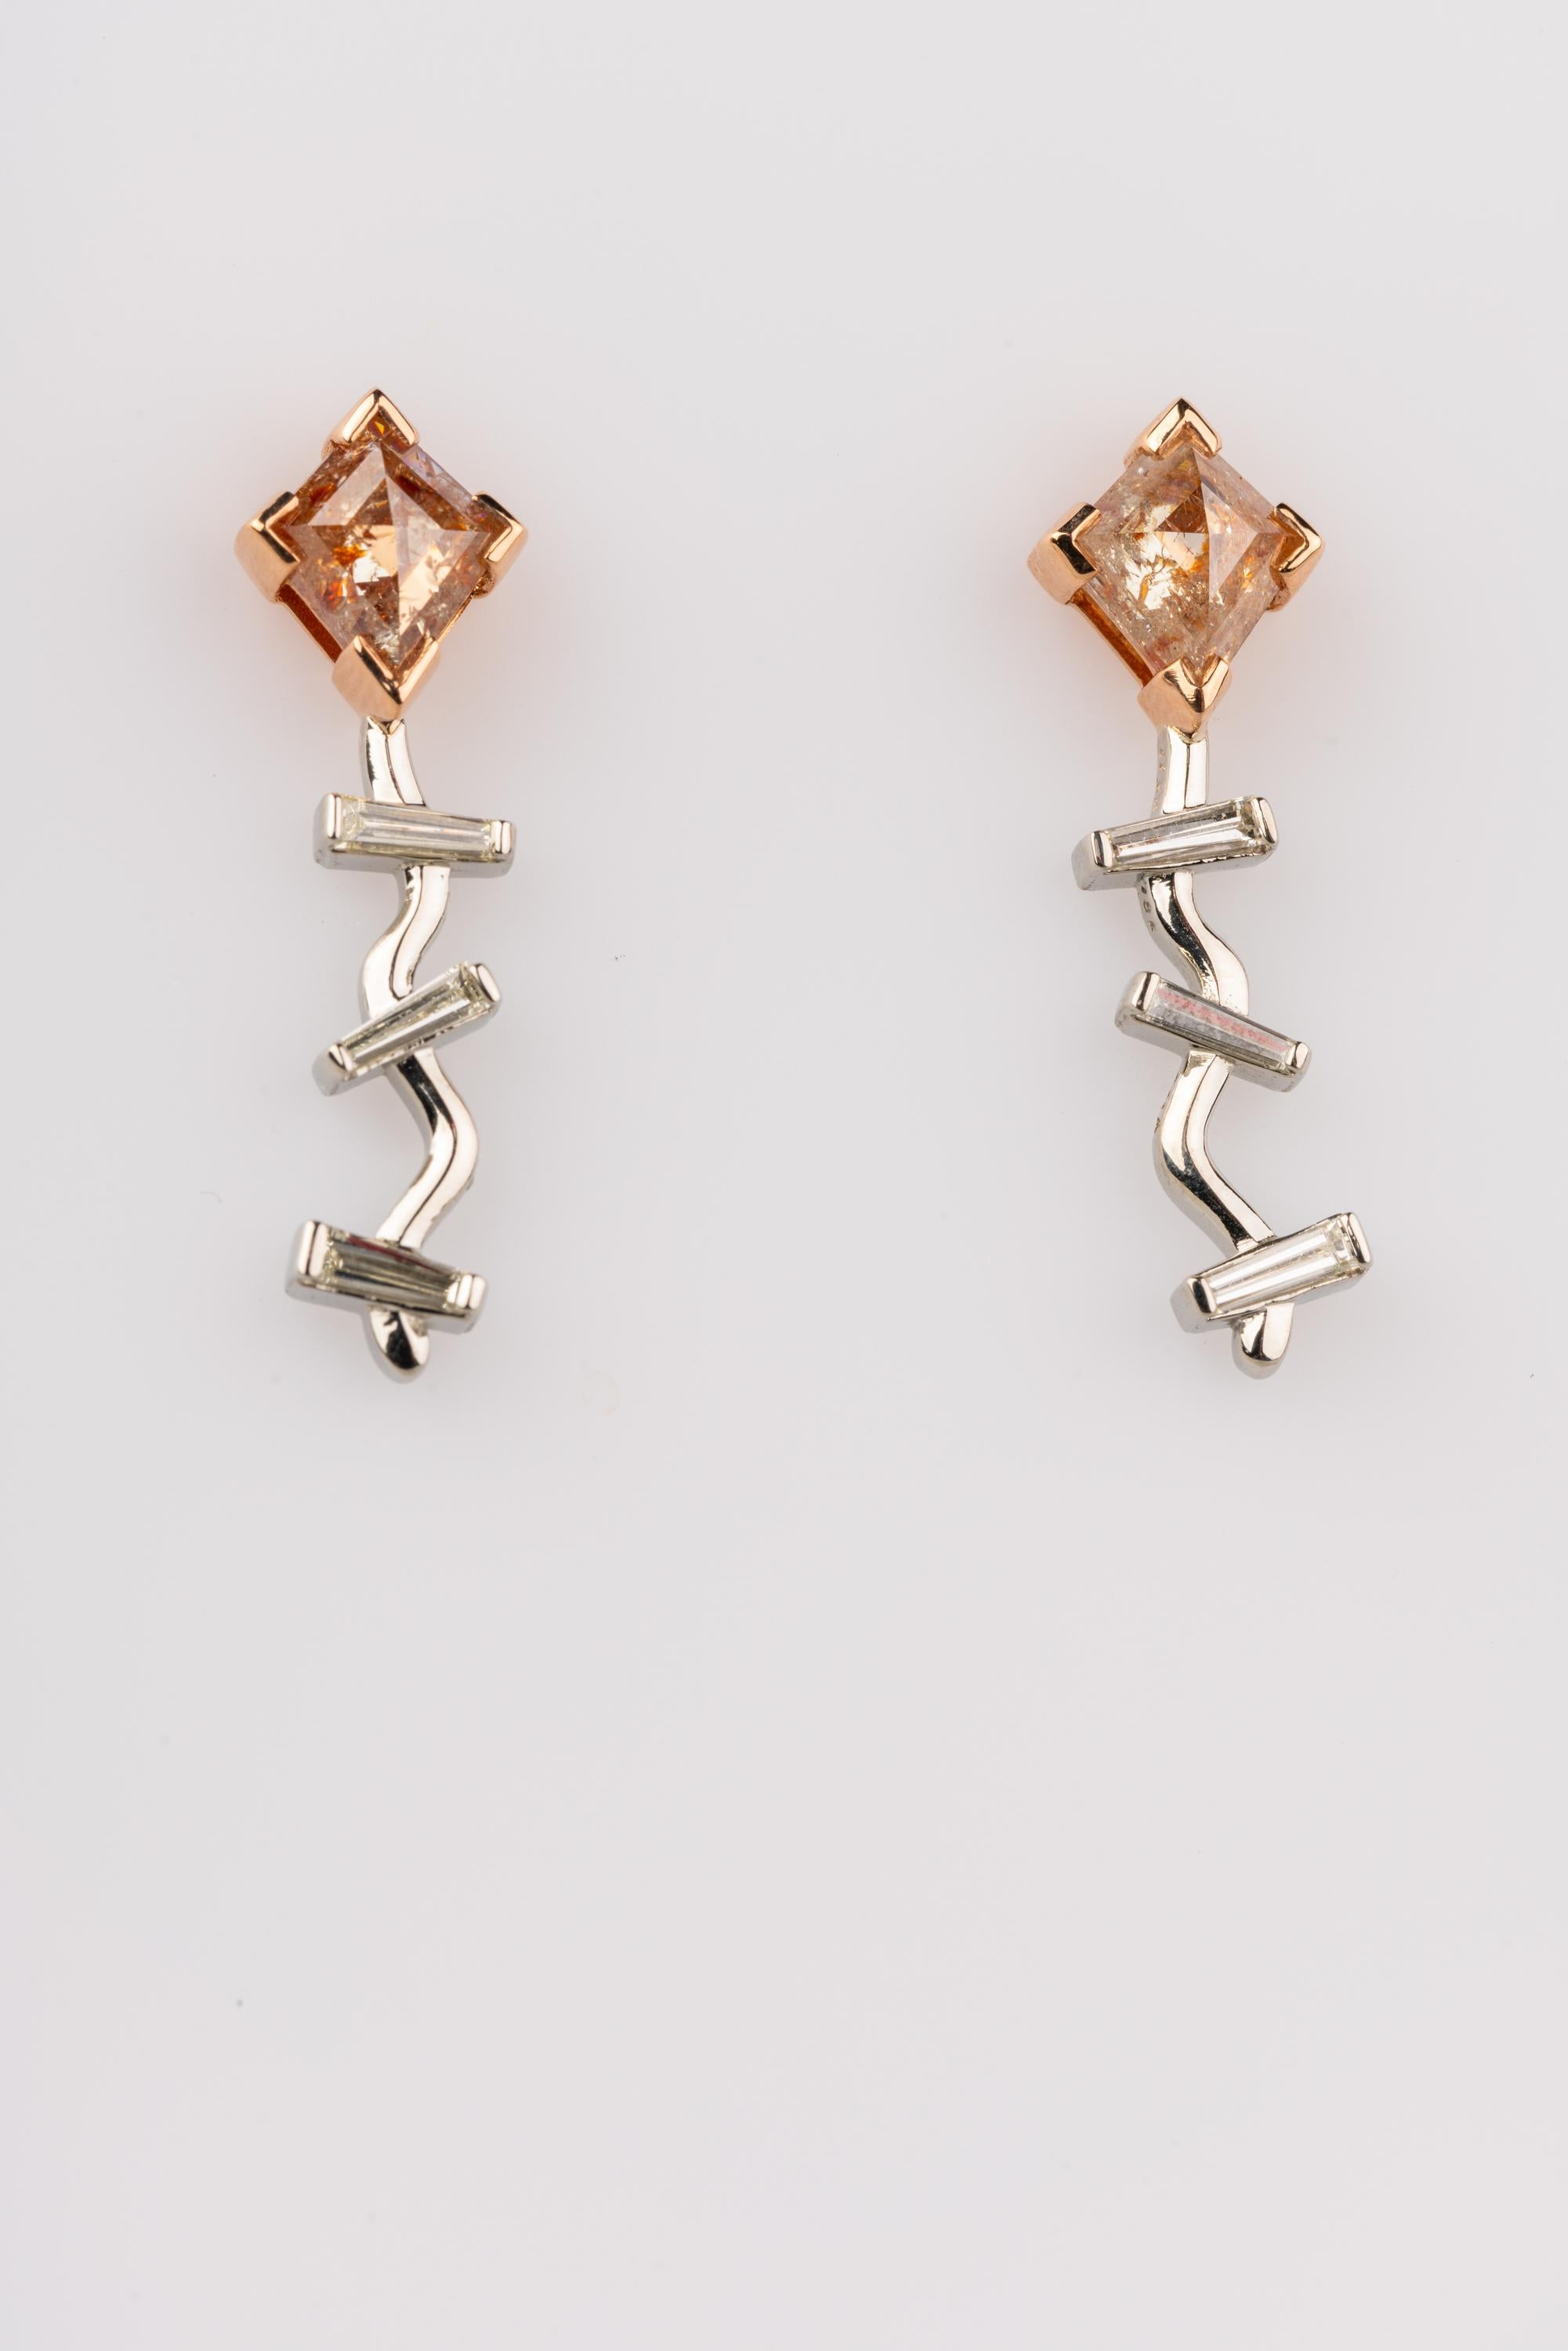 A pair of 18k rose and white gold kite earrings set with 2.04 total carats of kite shaped reddish rose cut diamonds, and .11 total carats of baguette diamonds, F color VS clarity. These earring were made and designed by llyn strong.